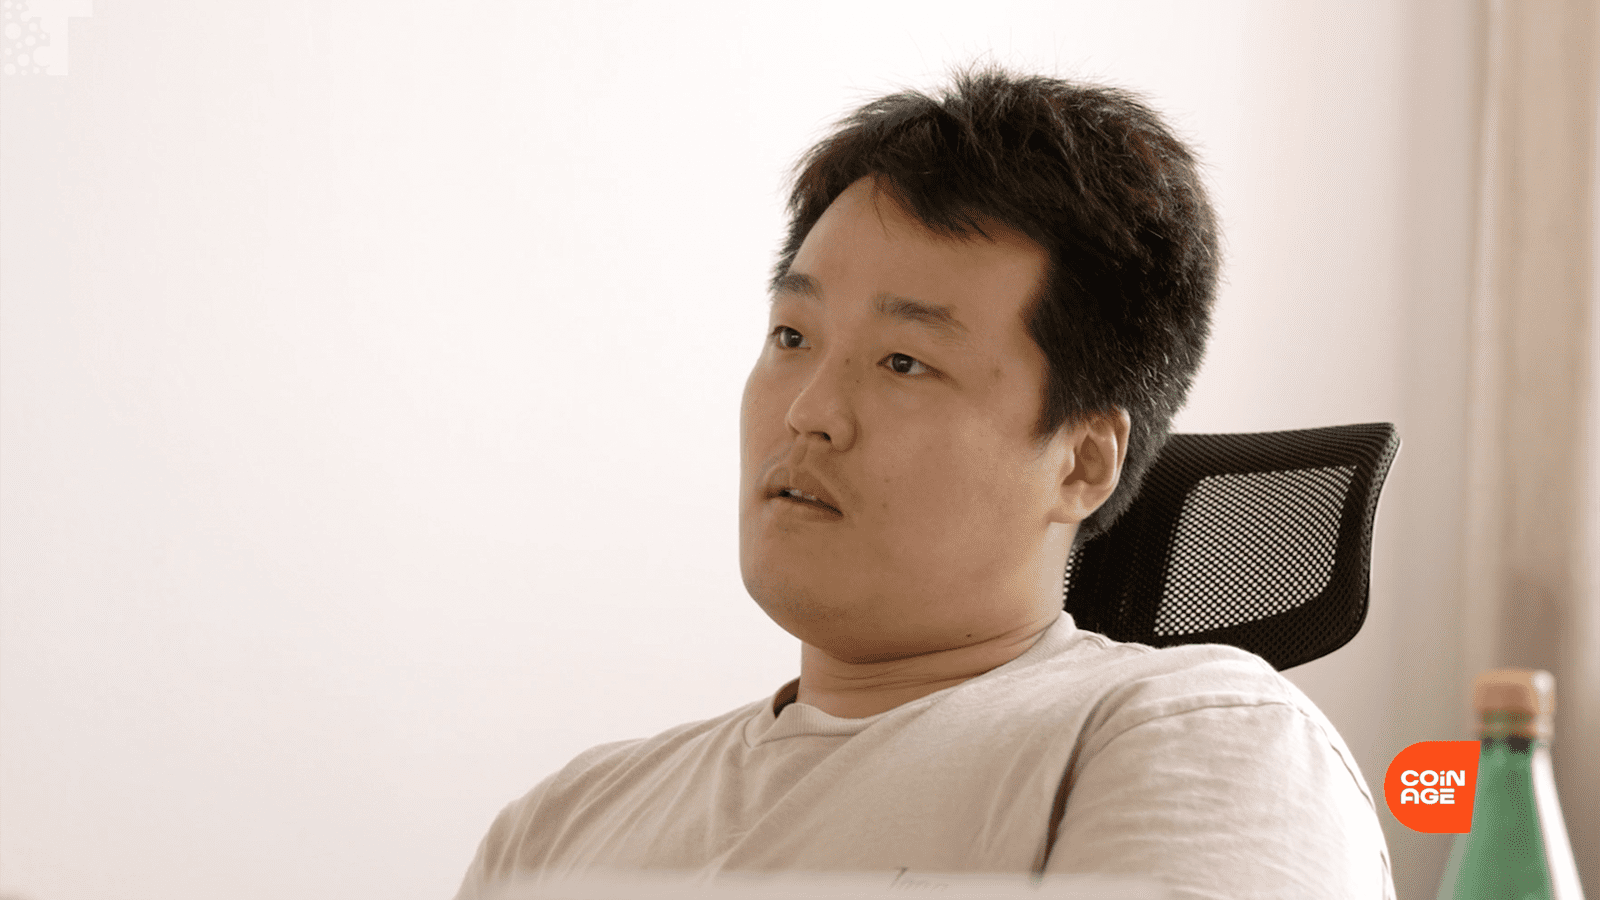 Terra’s Do Kwon at the Risk of Losing His Passport